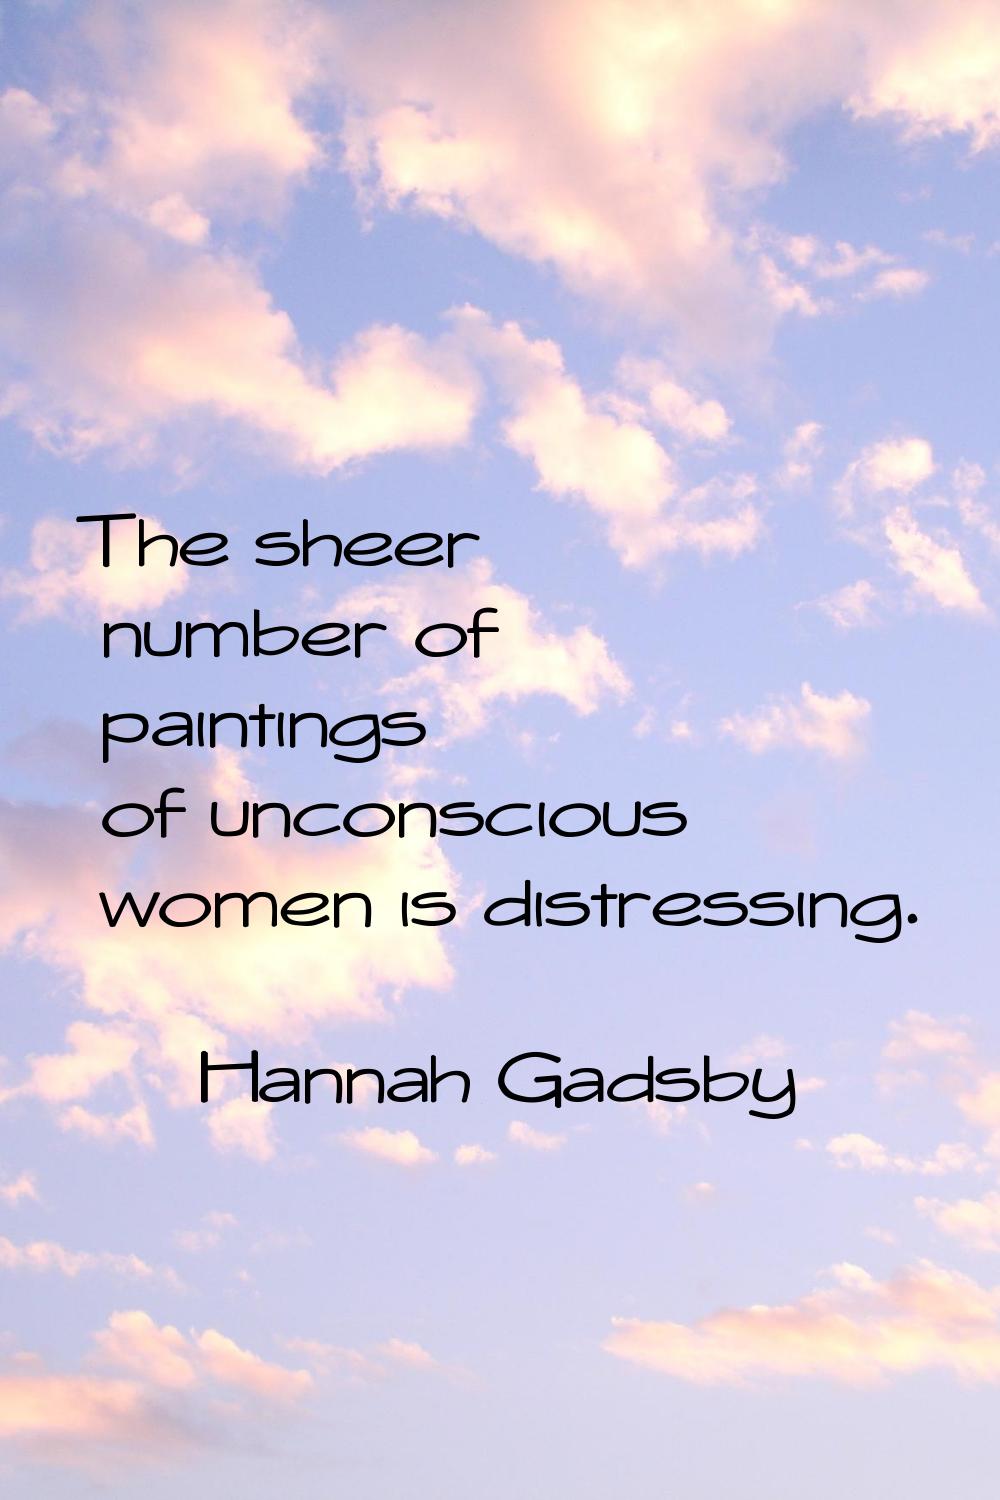 The sheer number of paintings of unconscious women is distressing.